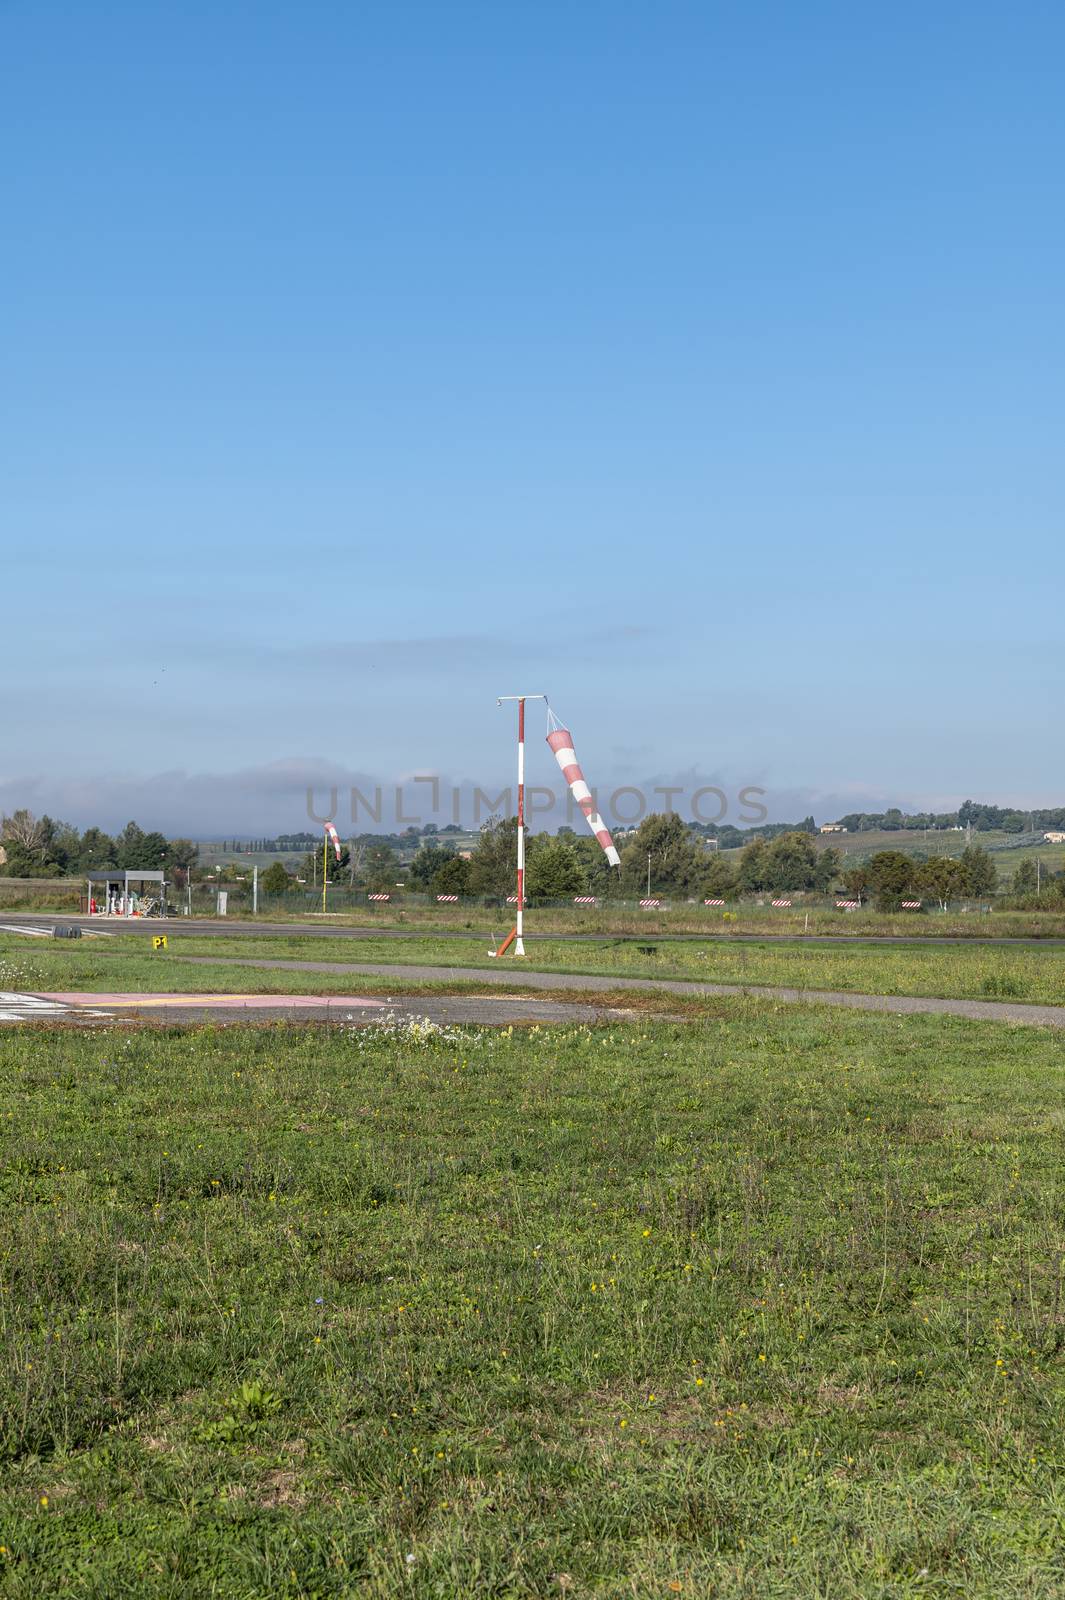 wind indicator for airport near the runway by carfedeph